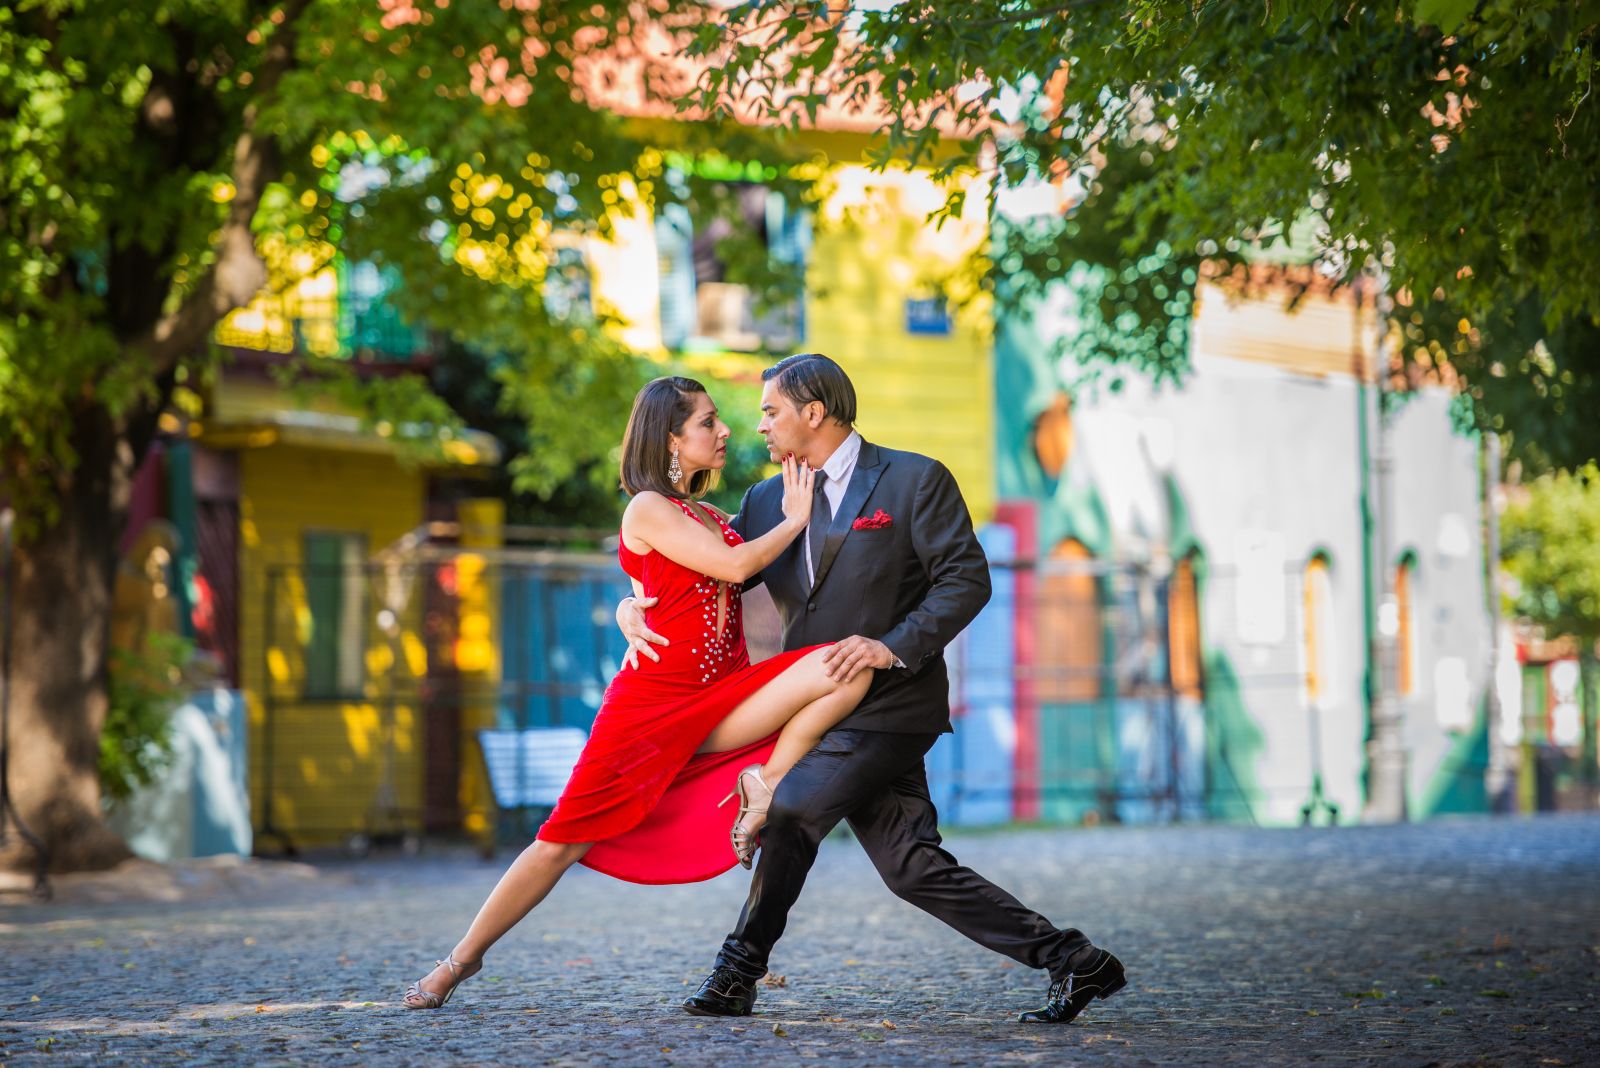 Tango dancers in the streets of Buenos Aires Argentina